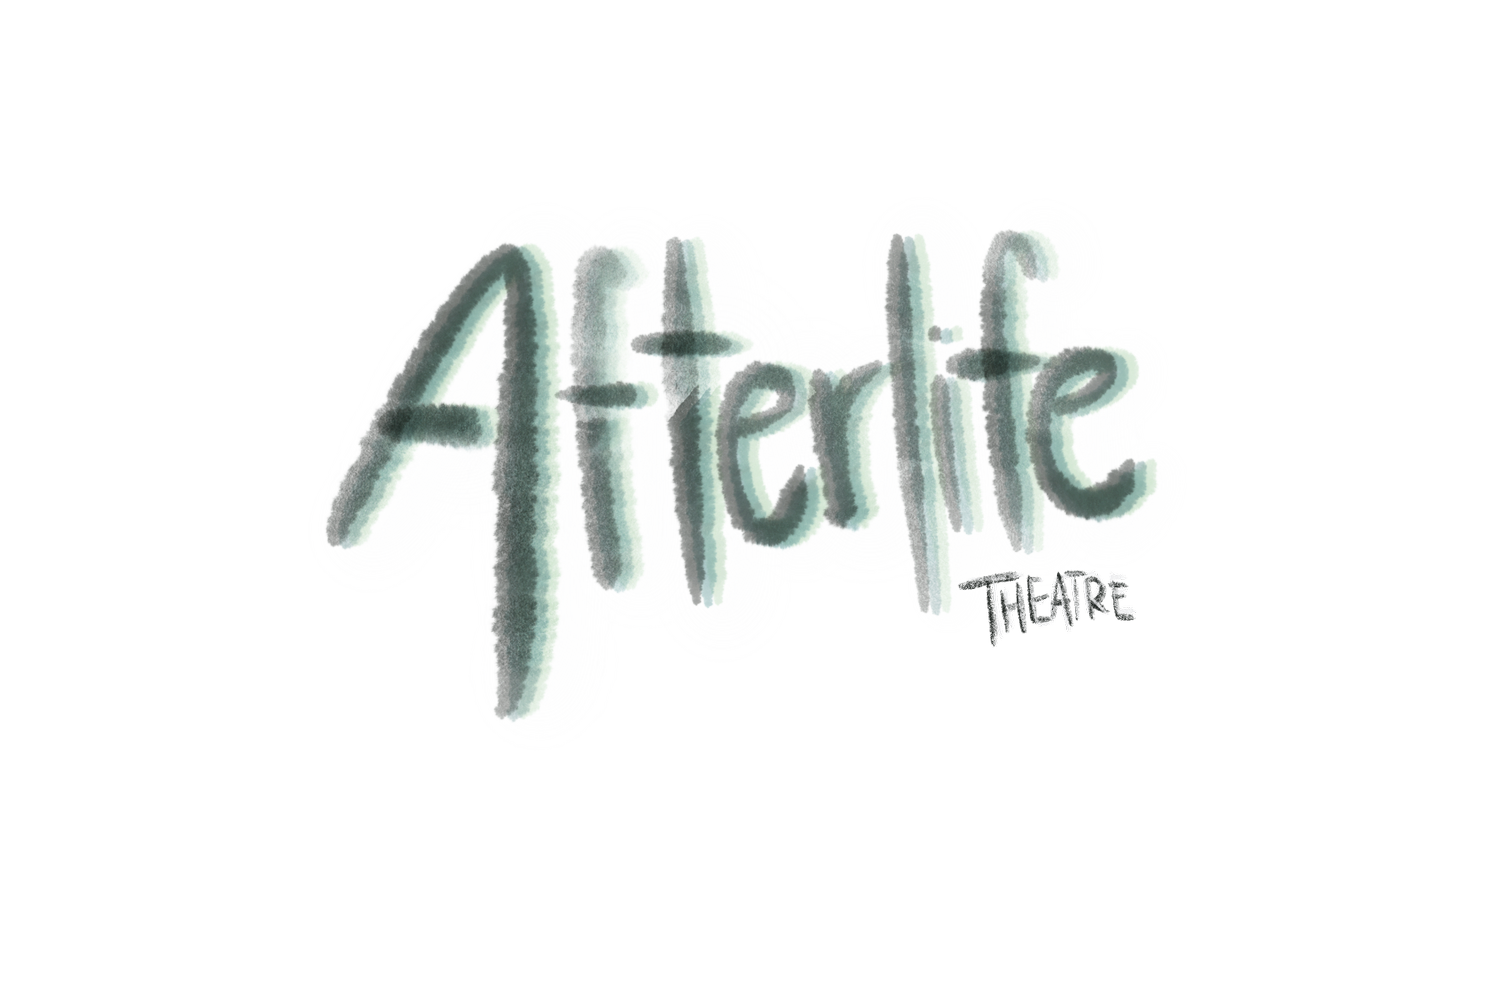 Afterlife Theatre